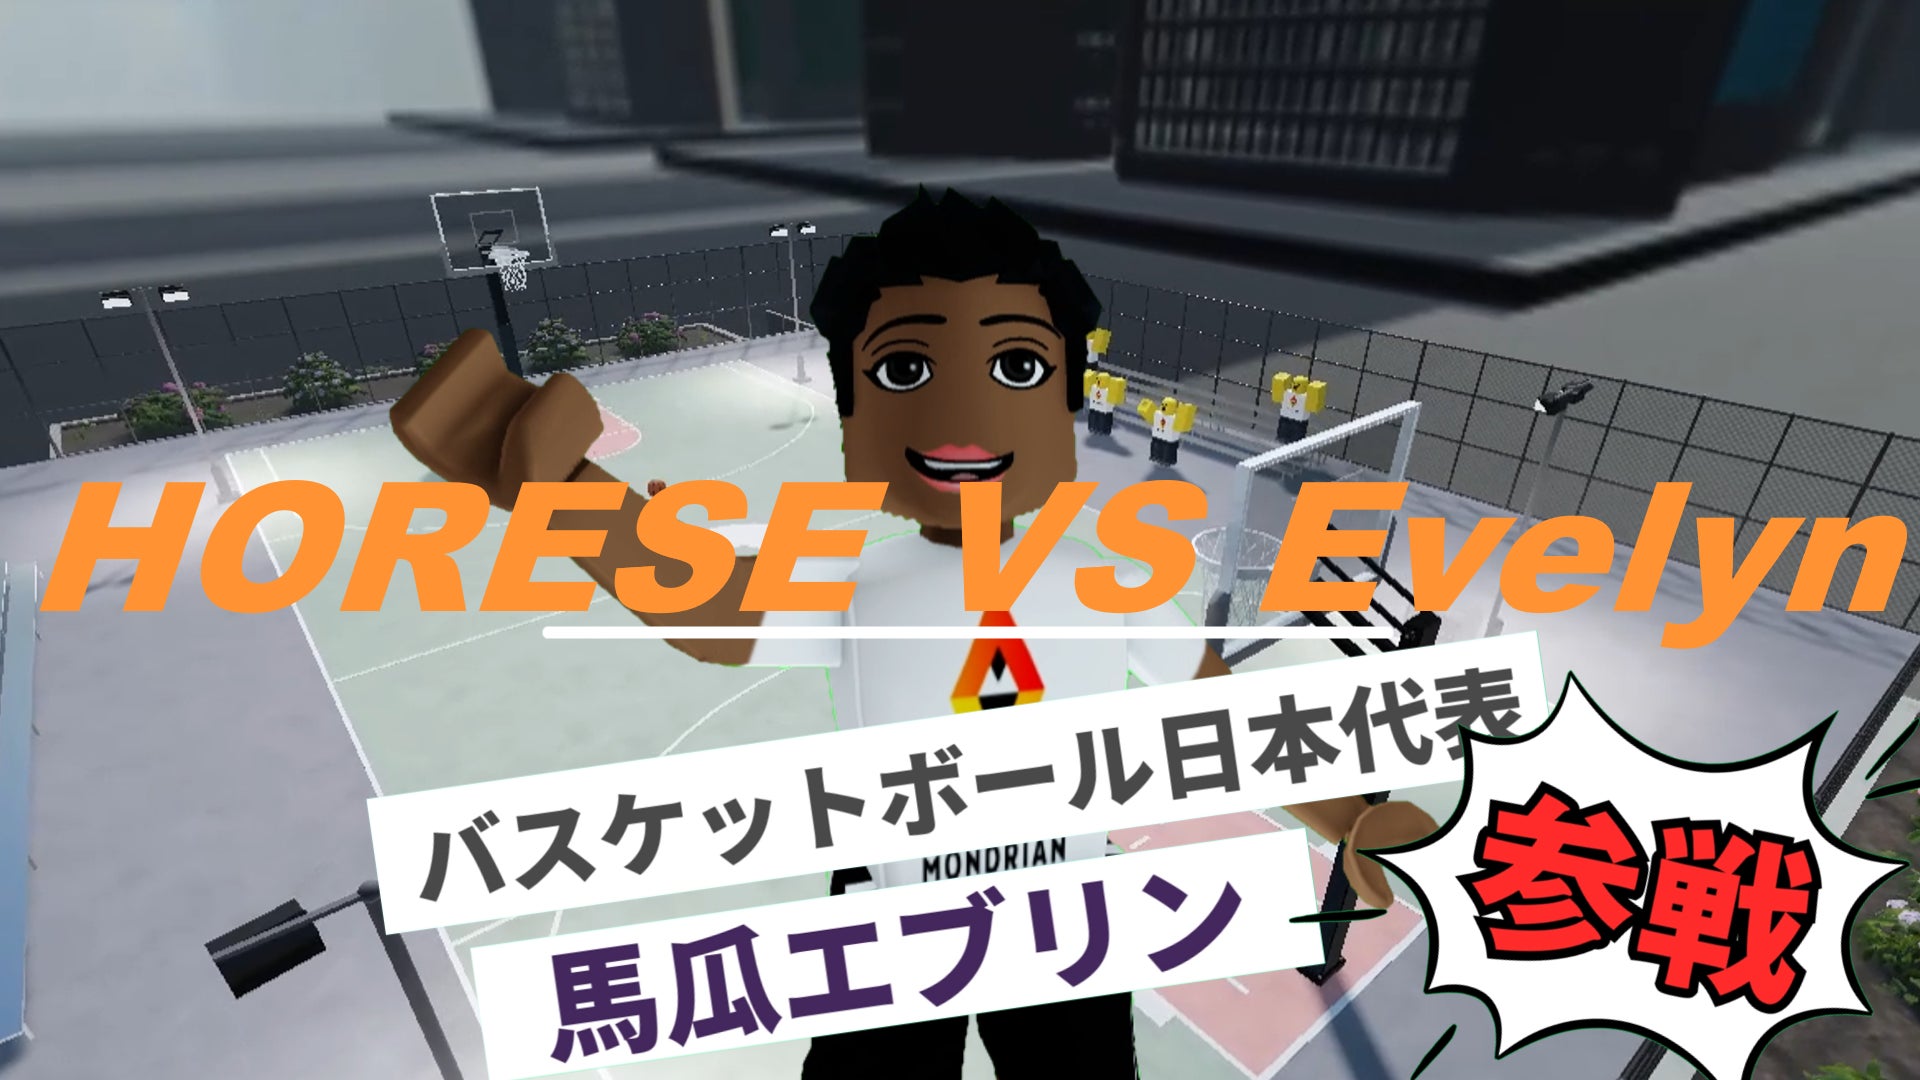 『HORSE IN EVELYN』3.5億人が遊ぶRobloxに登場！